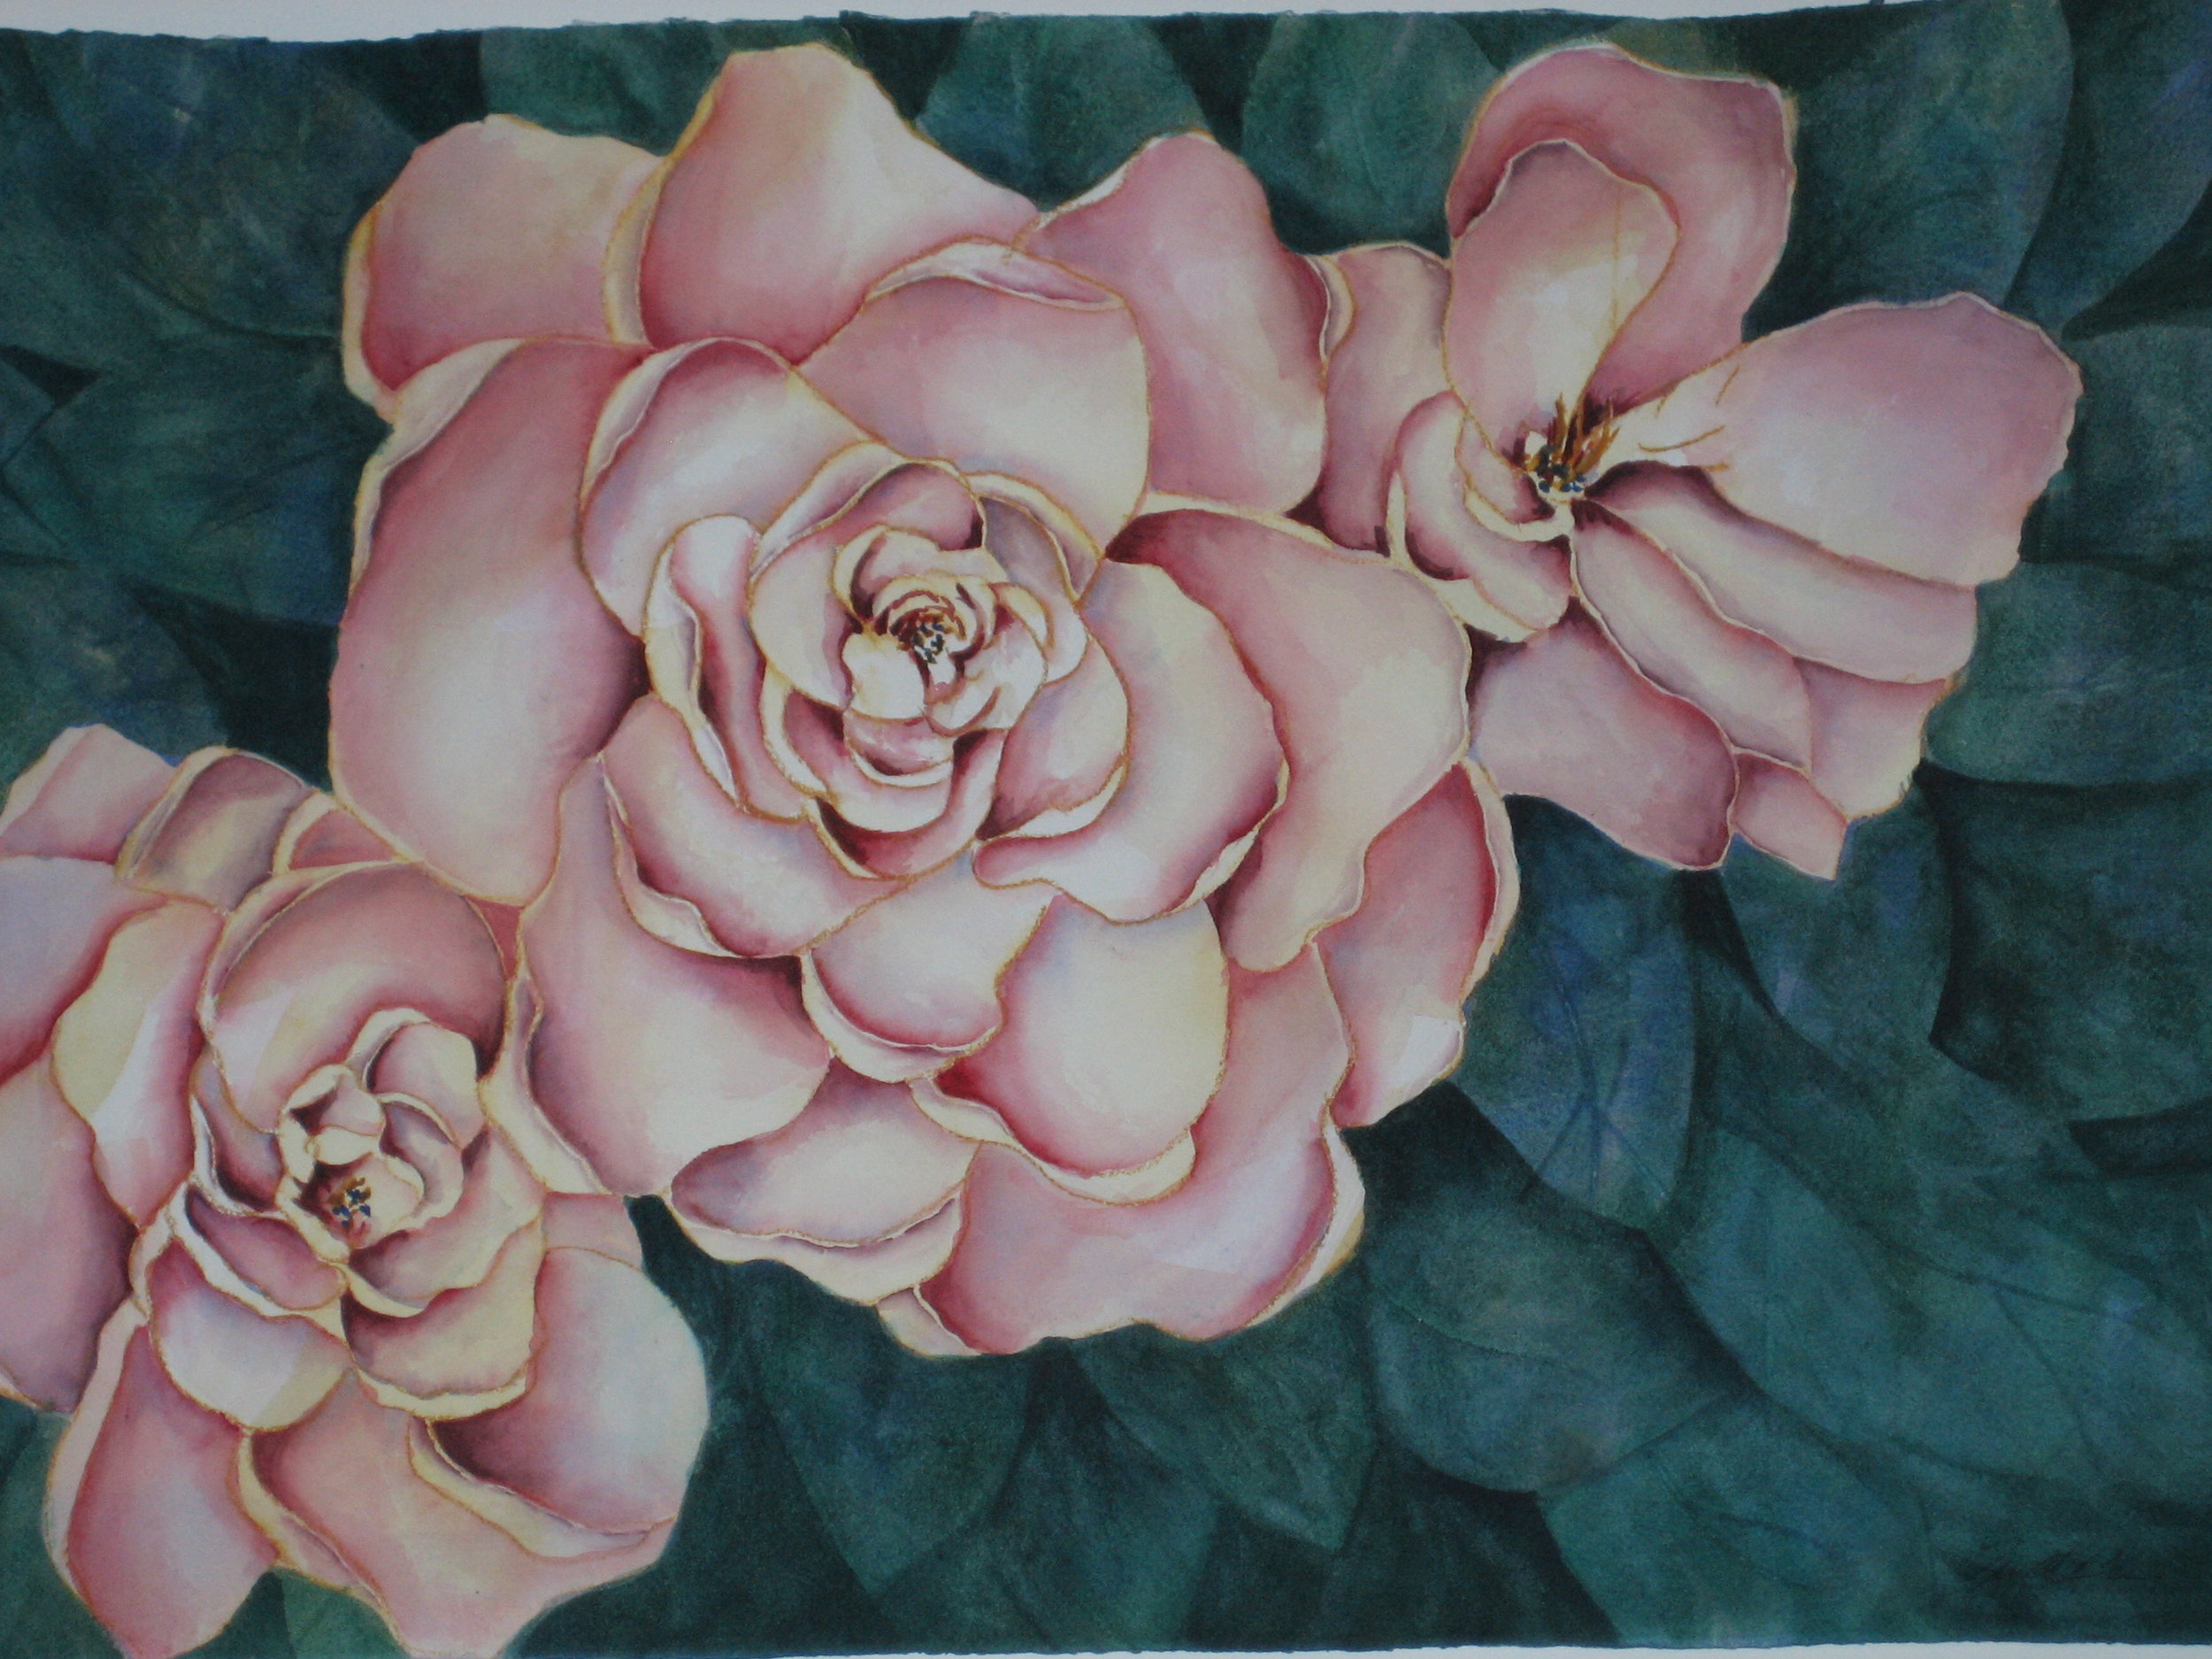 #44 "Pink Roses" $375